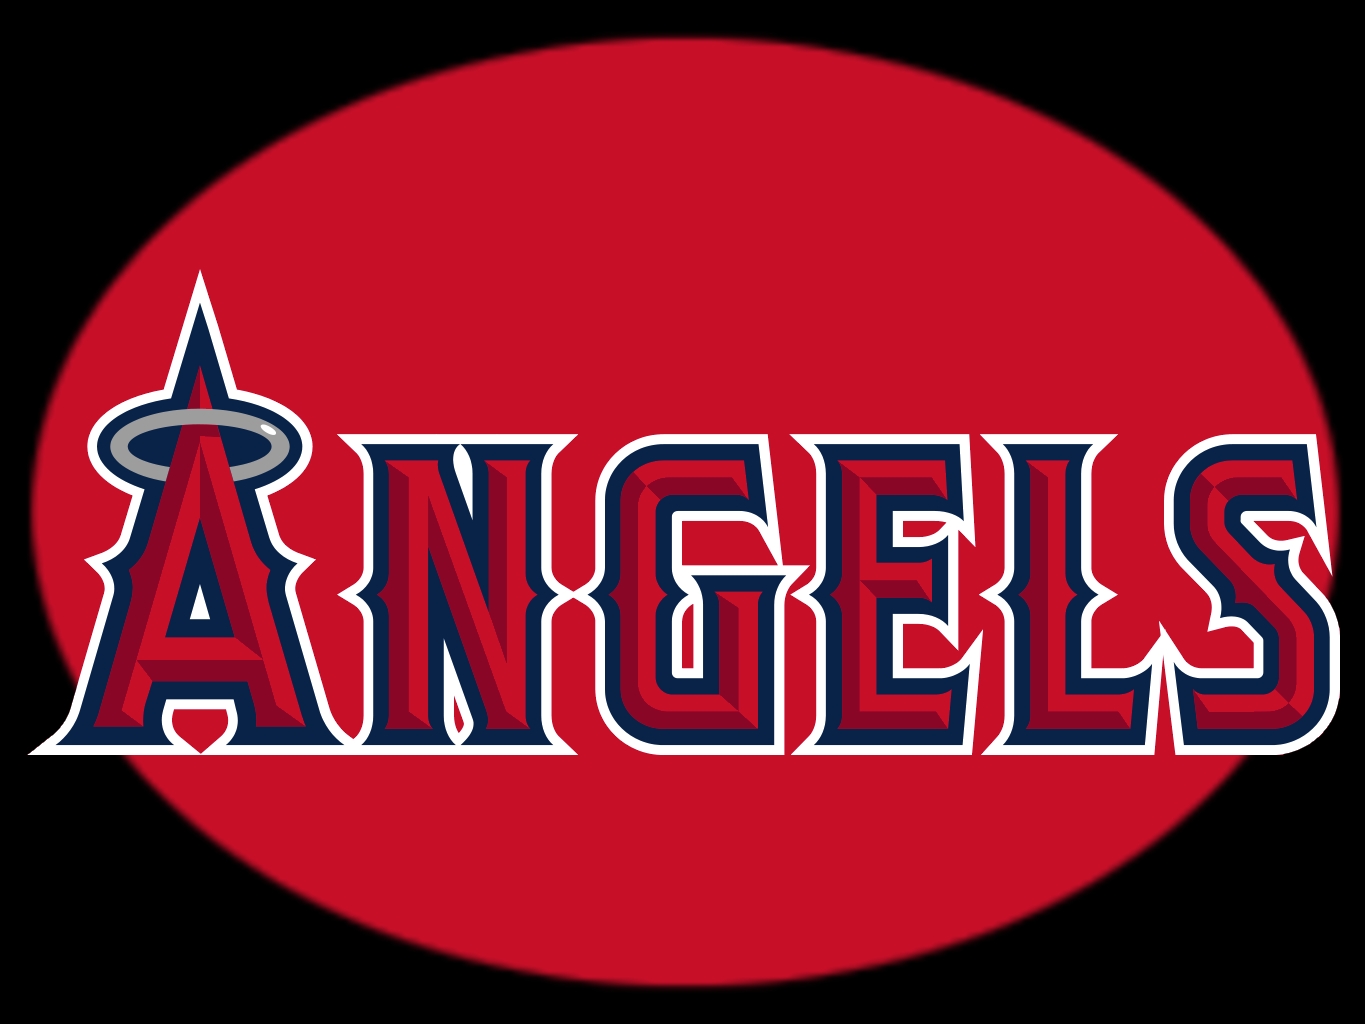  of Anaheim background Los Angeles Angels of Anaheim wallpapers 1365x1024